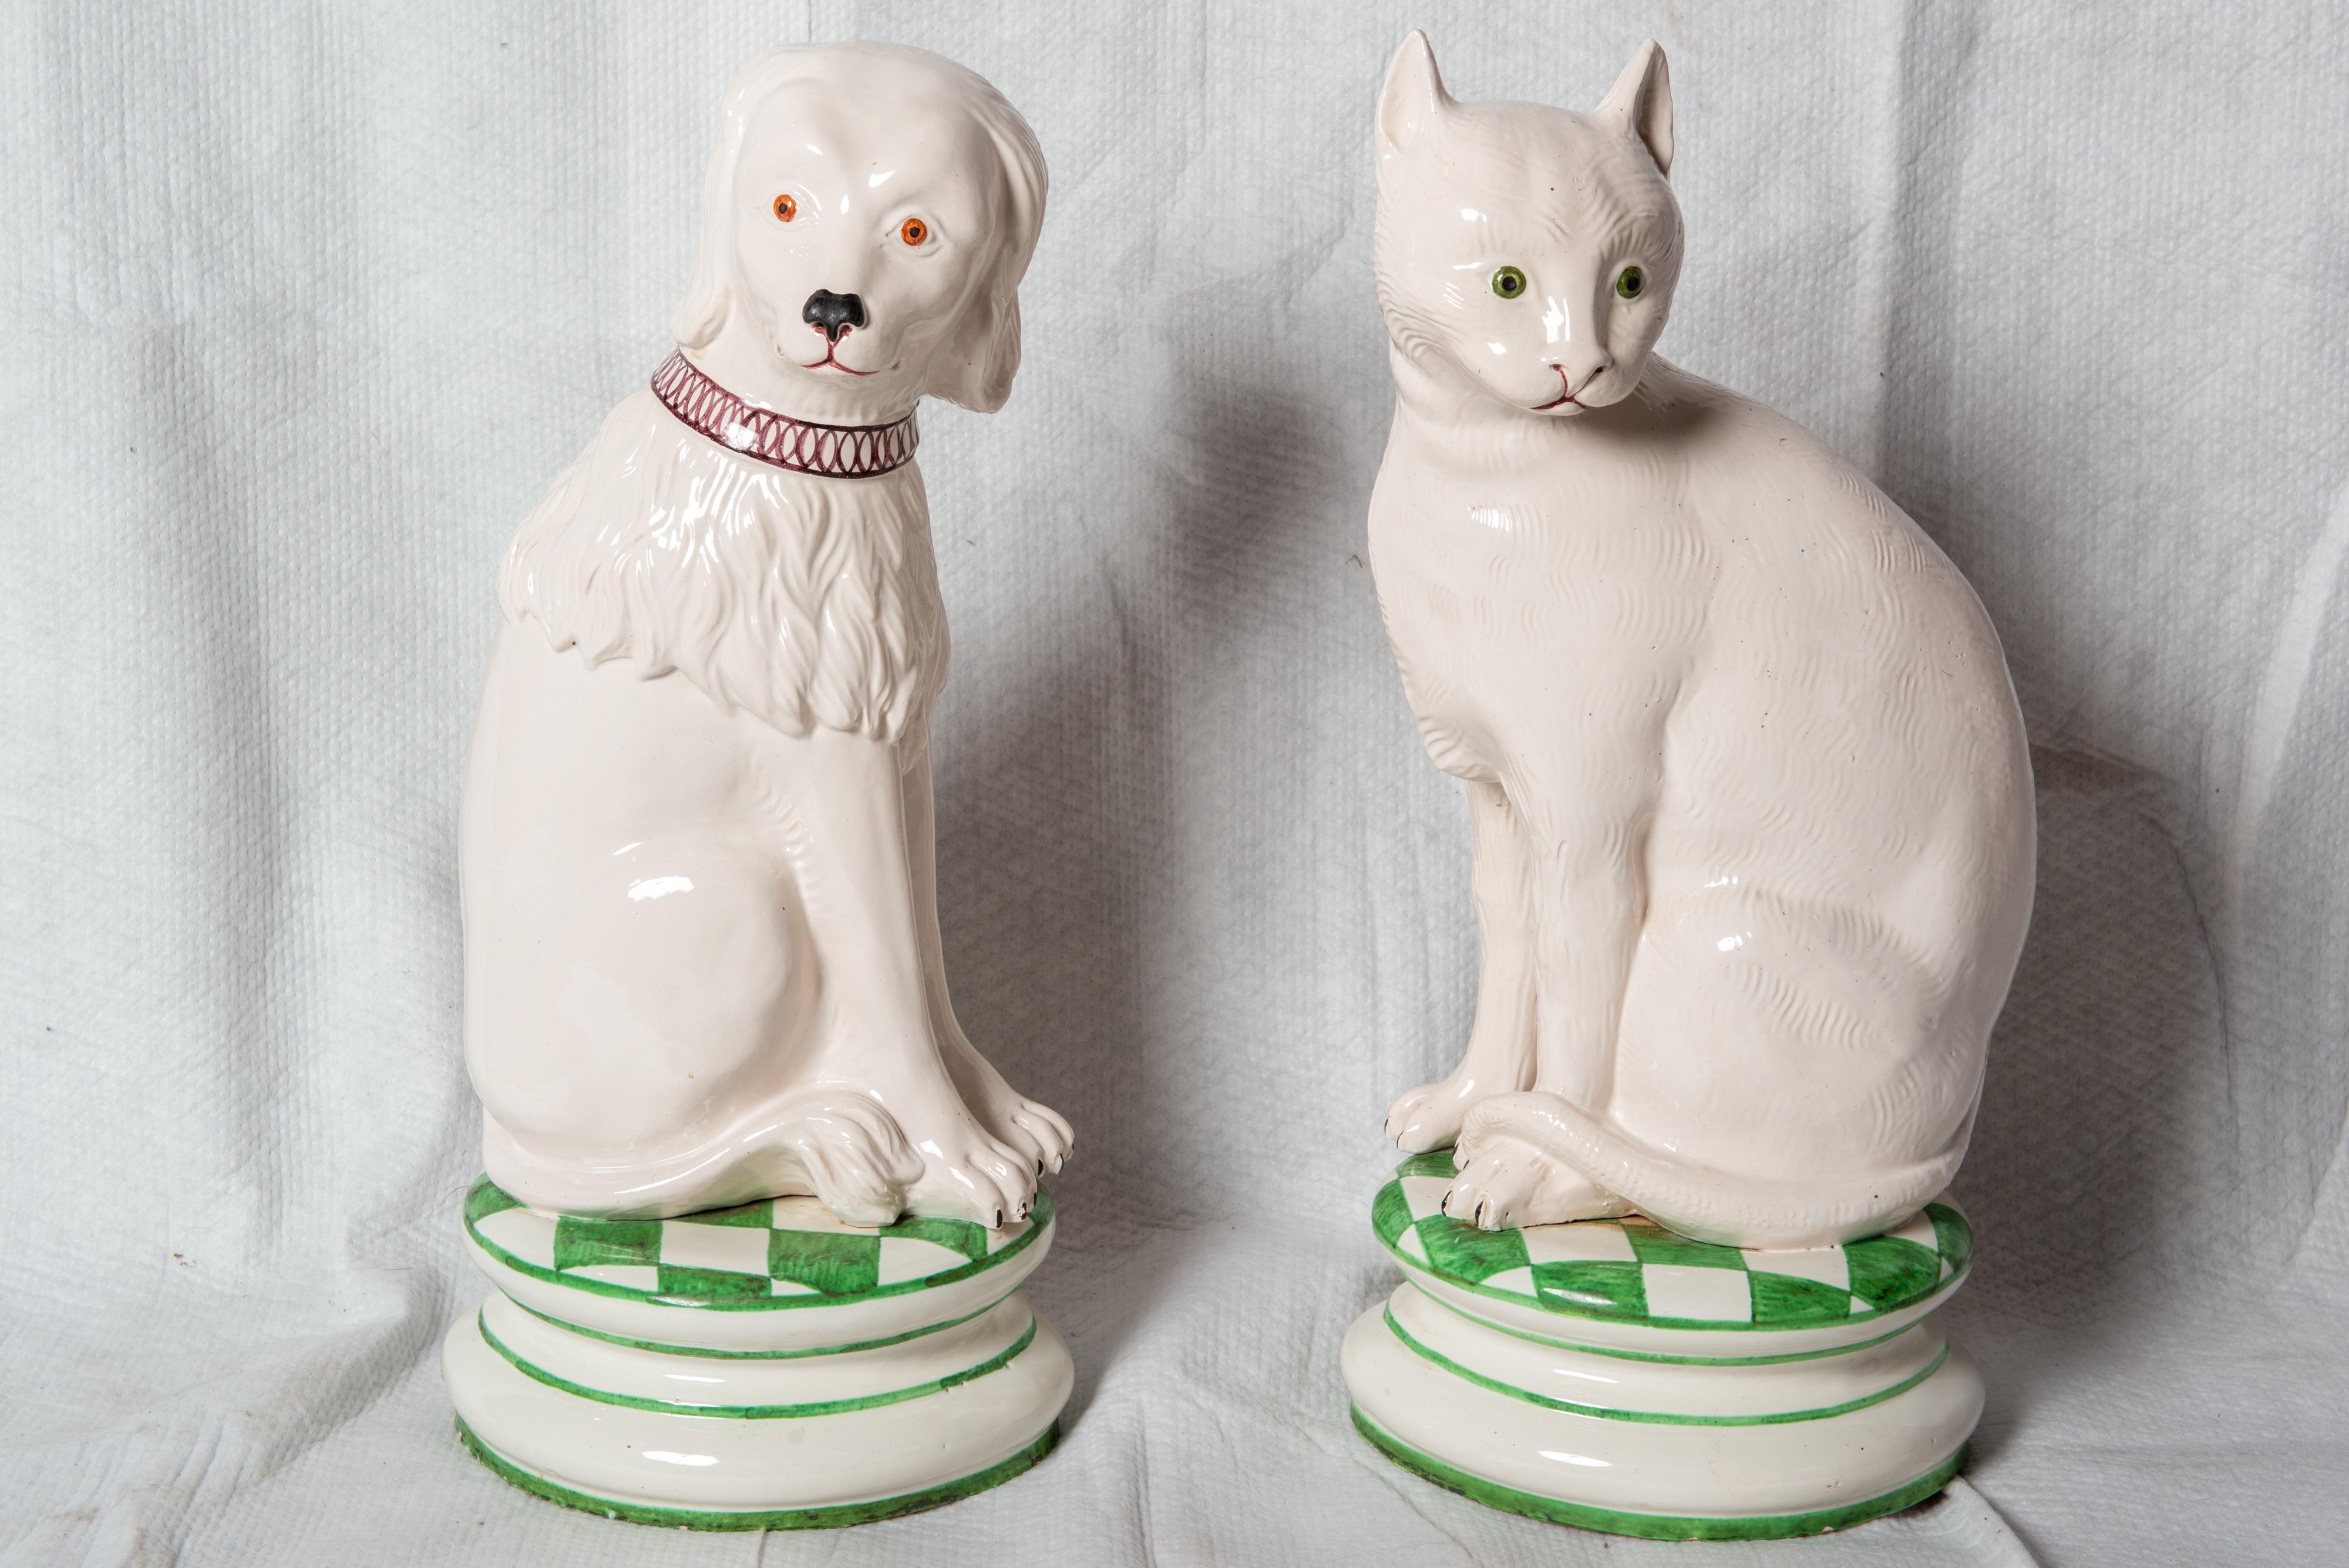 Whimsical ceramic dog and cat statues perched on green and white checked pillows. They are priced individually. Both animals have white fur. The dog has long wavy fur around his neck and shoulders and an elaborate
collar. He has bright brown eyes.